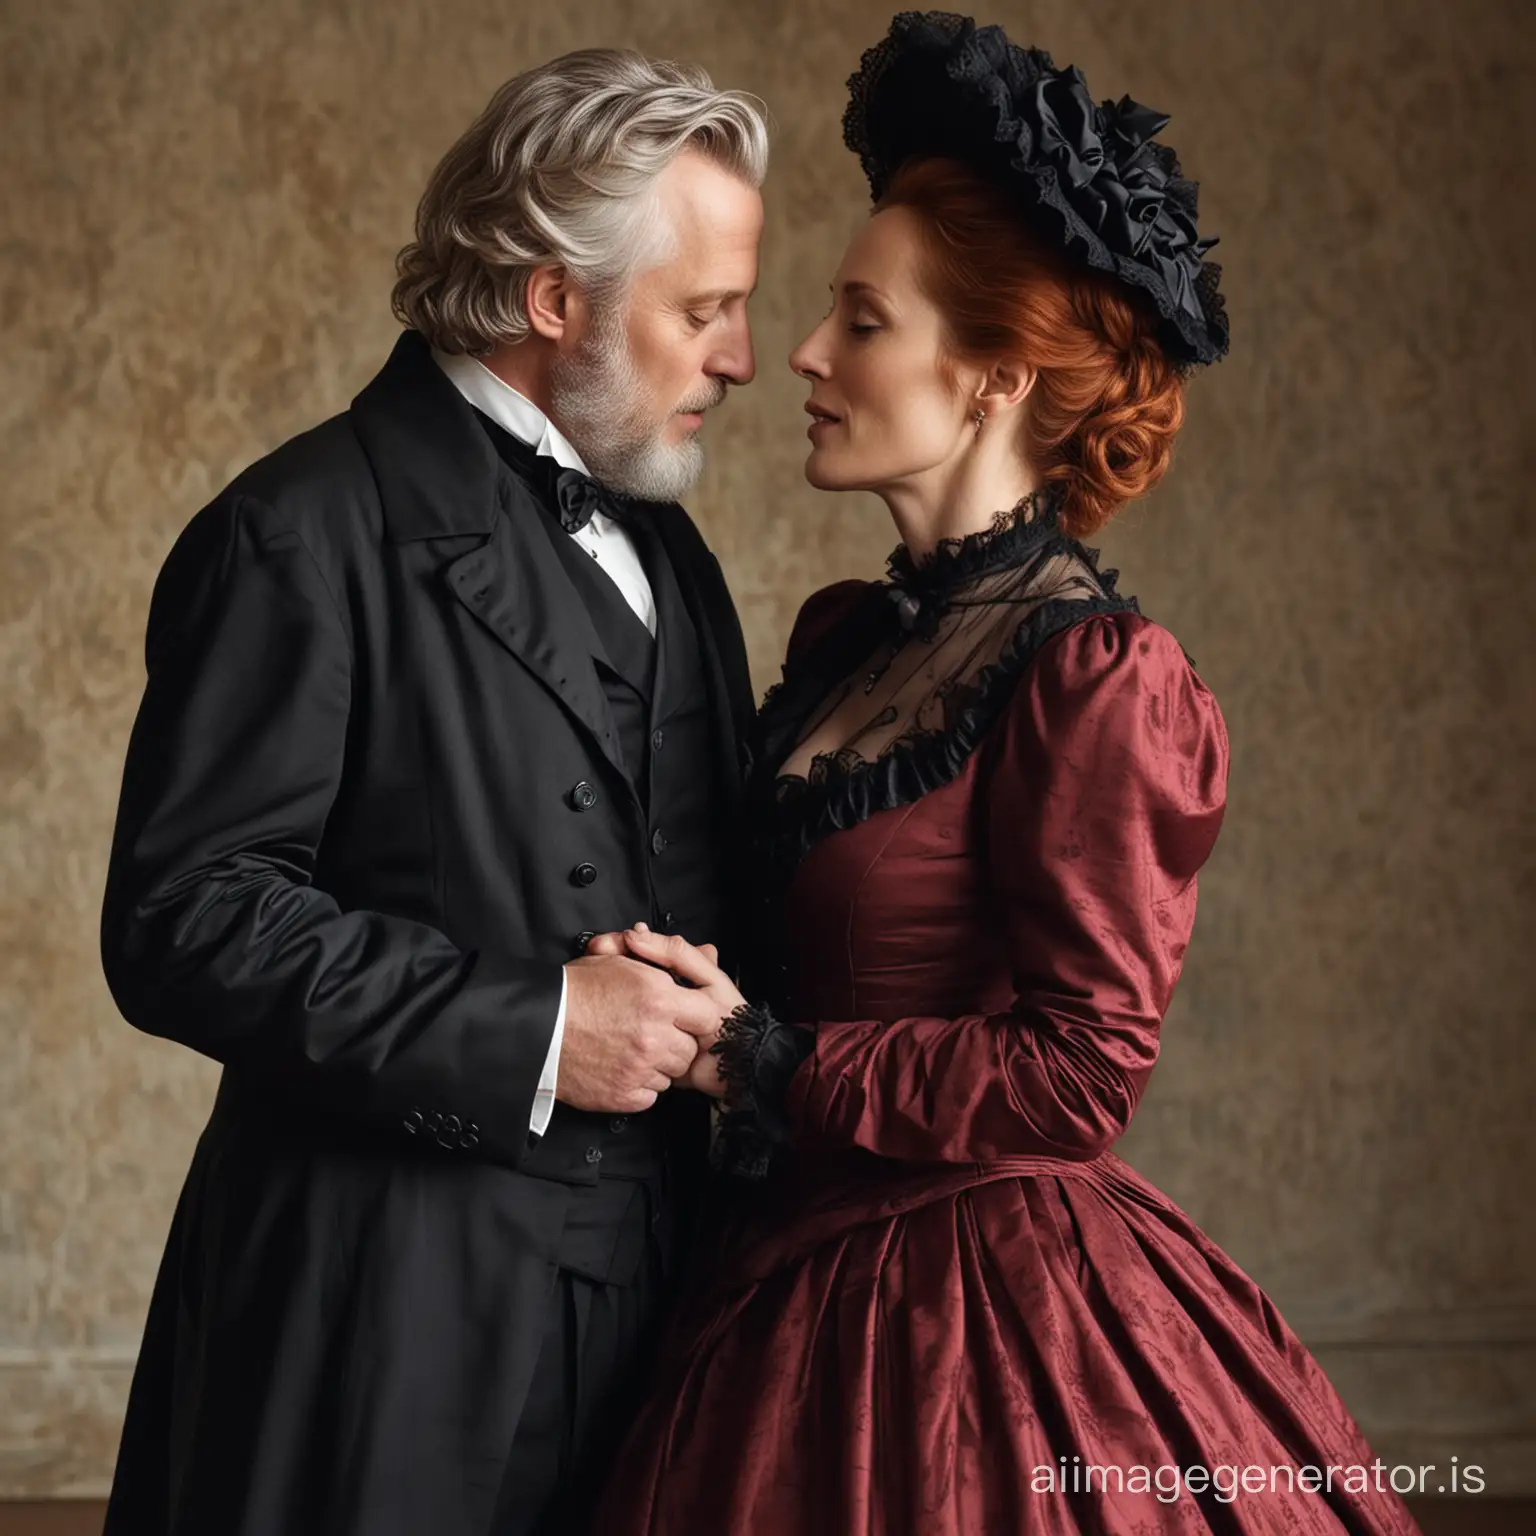 Romantic-Victorian-Newlyweds-Gillian-Anderson-and-Husband-Kissing-in-Vintage-Attire